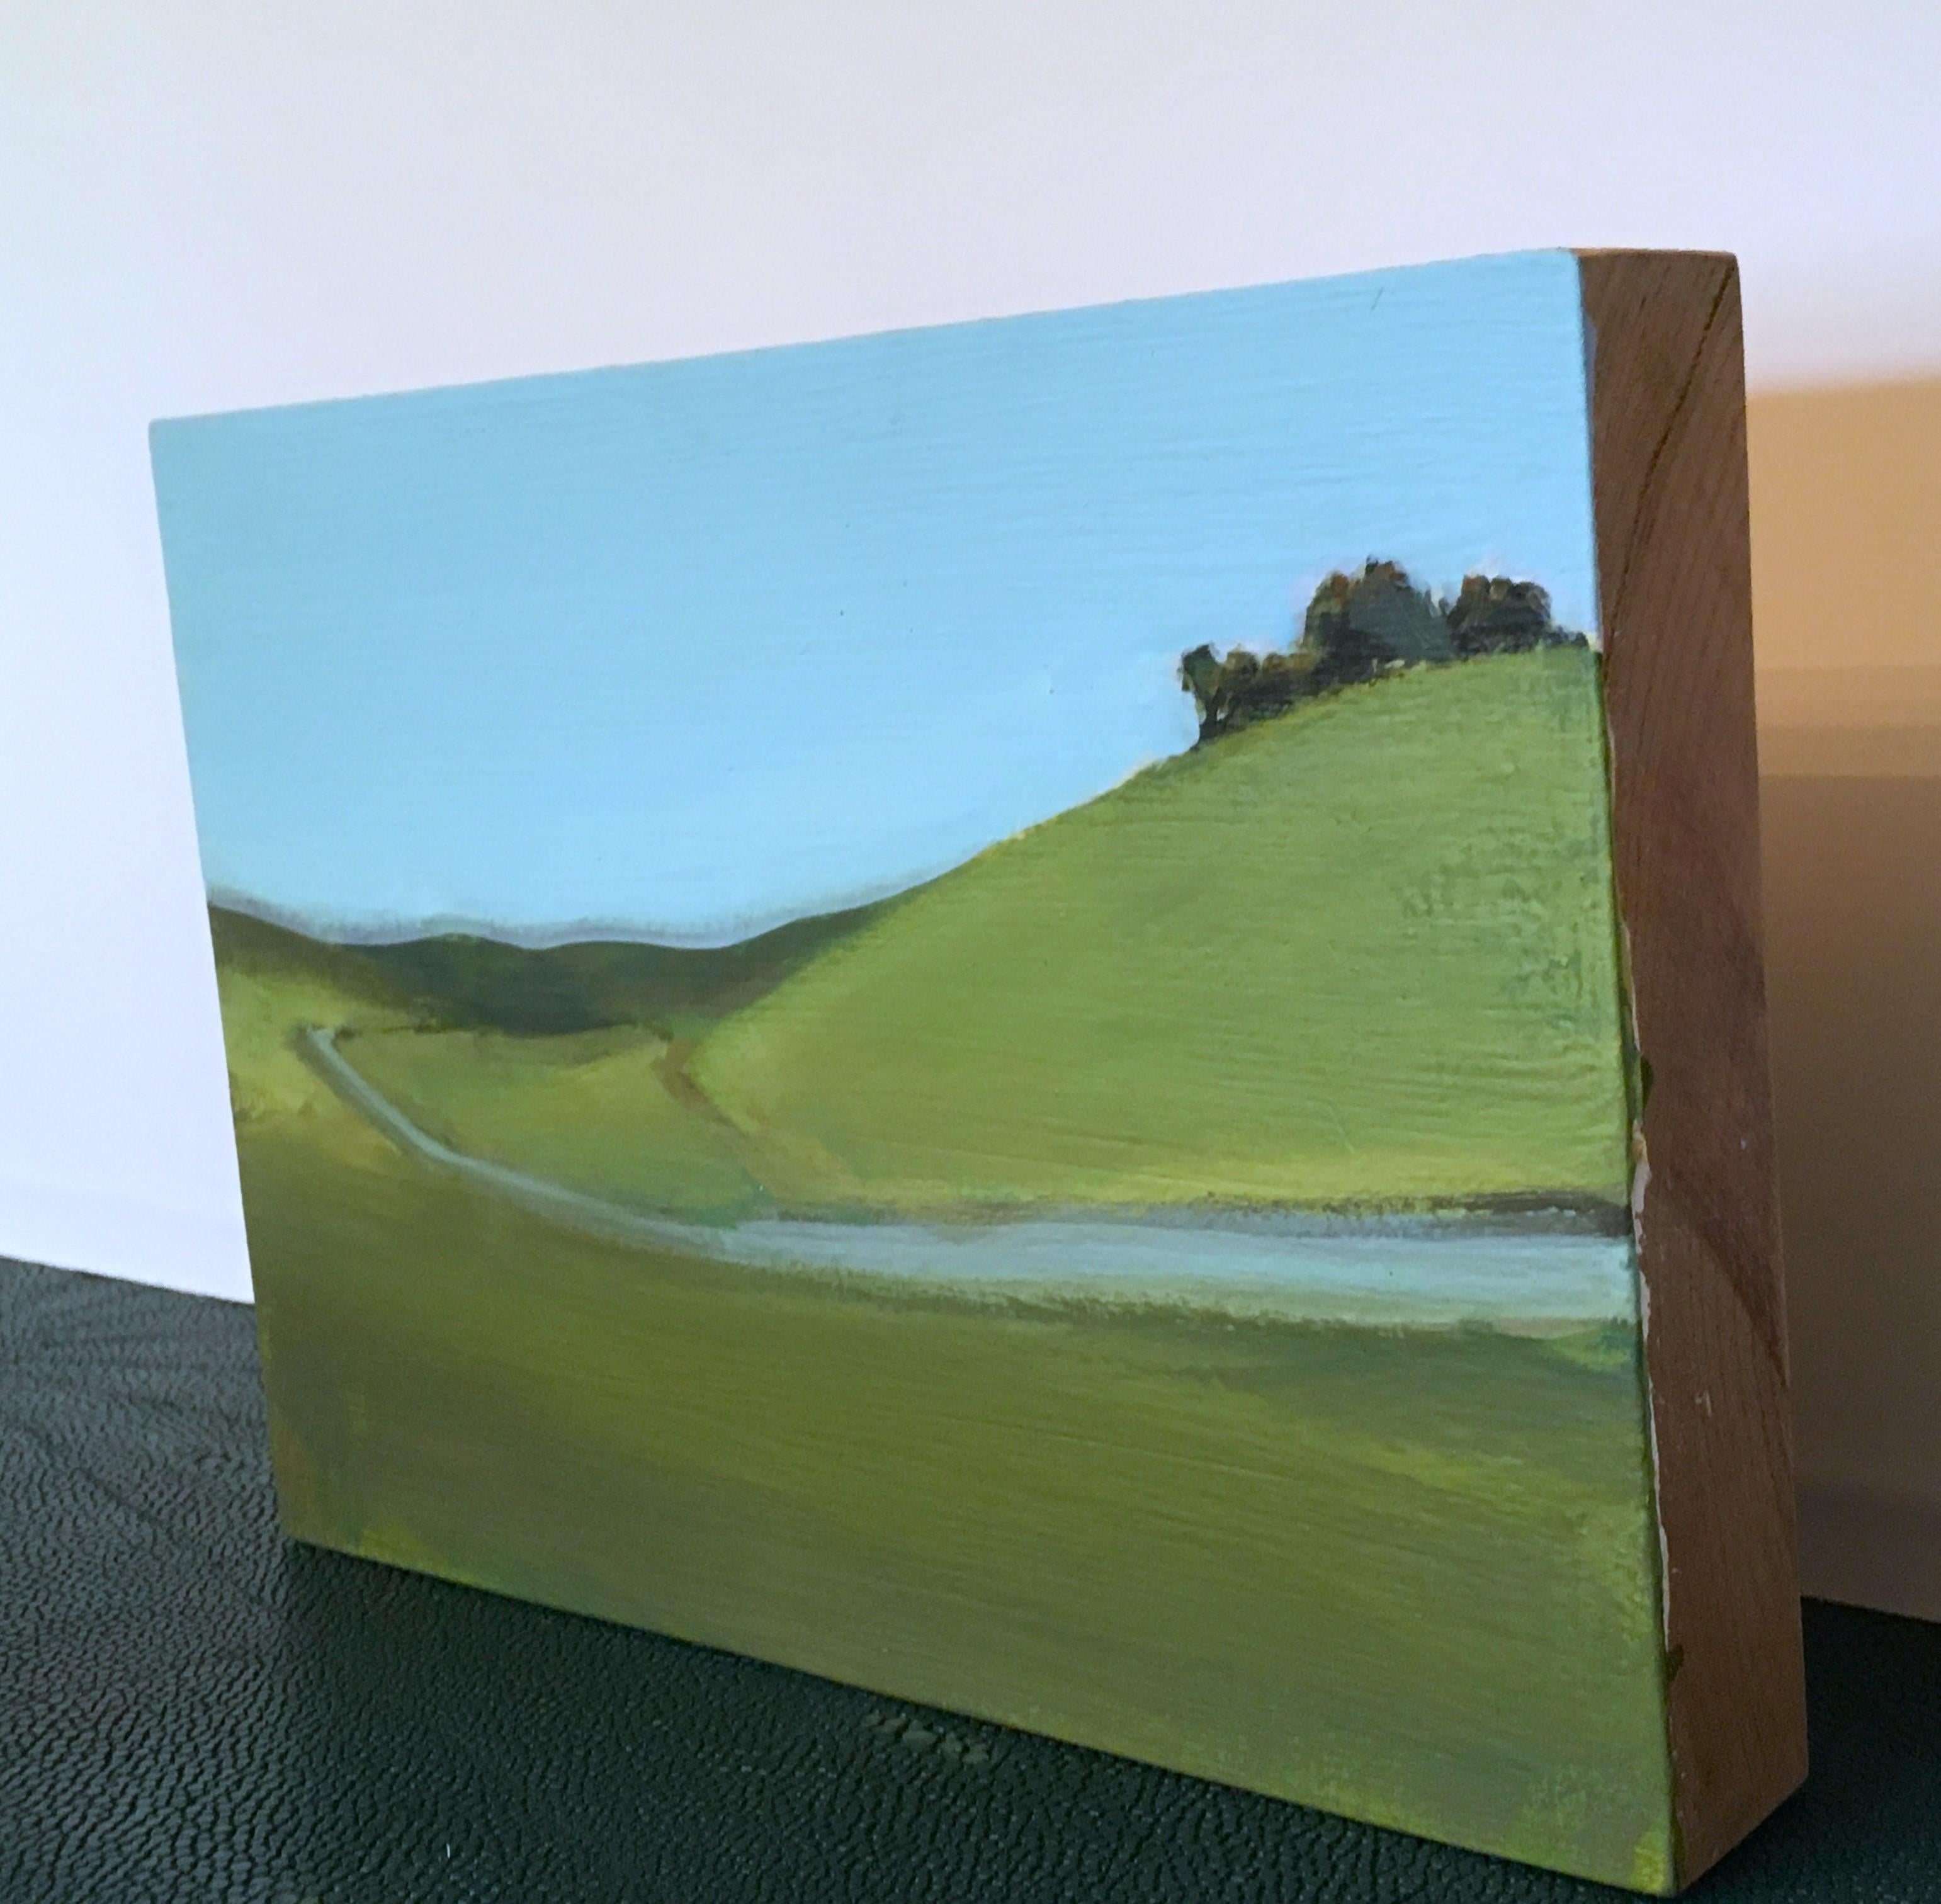 Uphill No. 1, Acrylic, Wood Panel, Landscape, Water, Grass, Hills - Contemporary Painting by Ferdinanda Florence